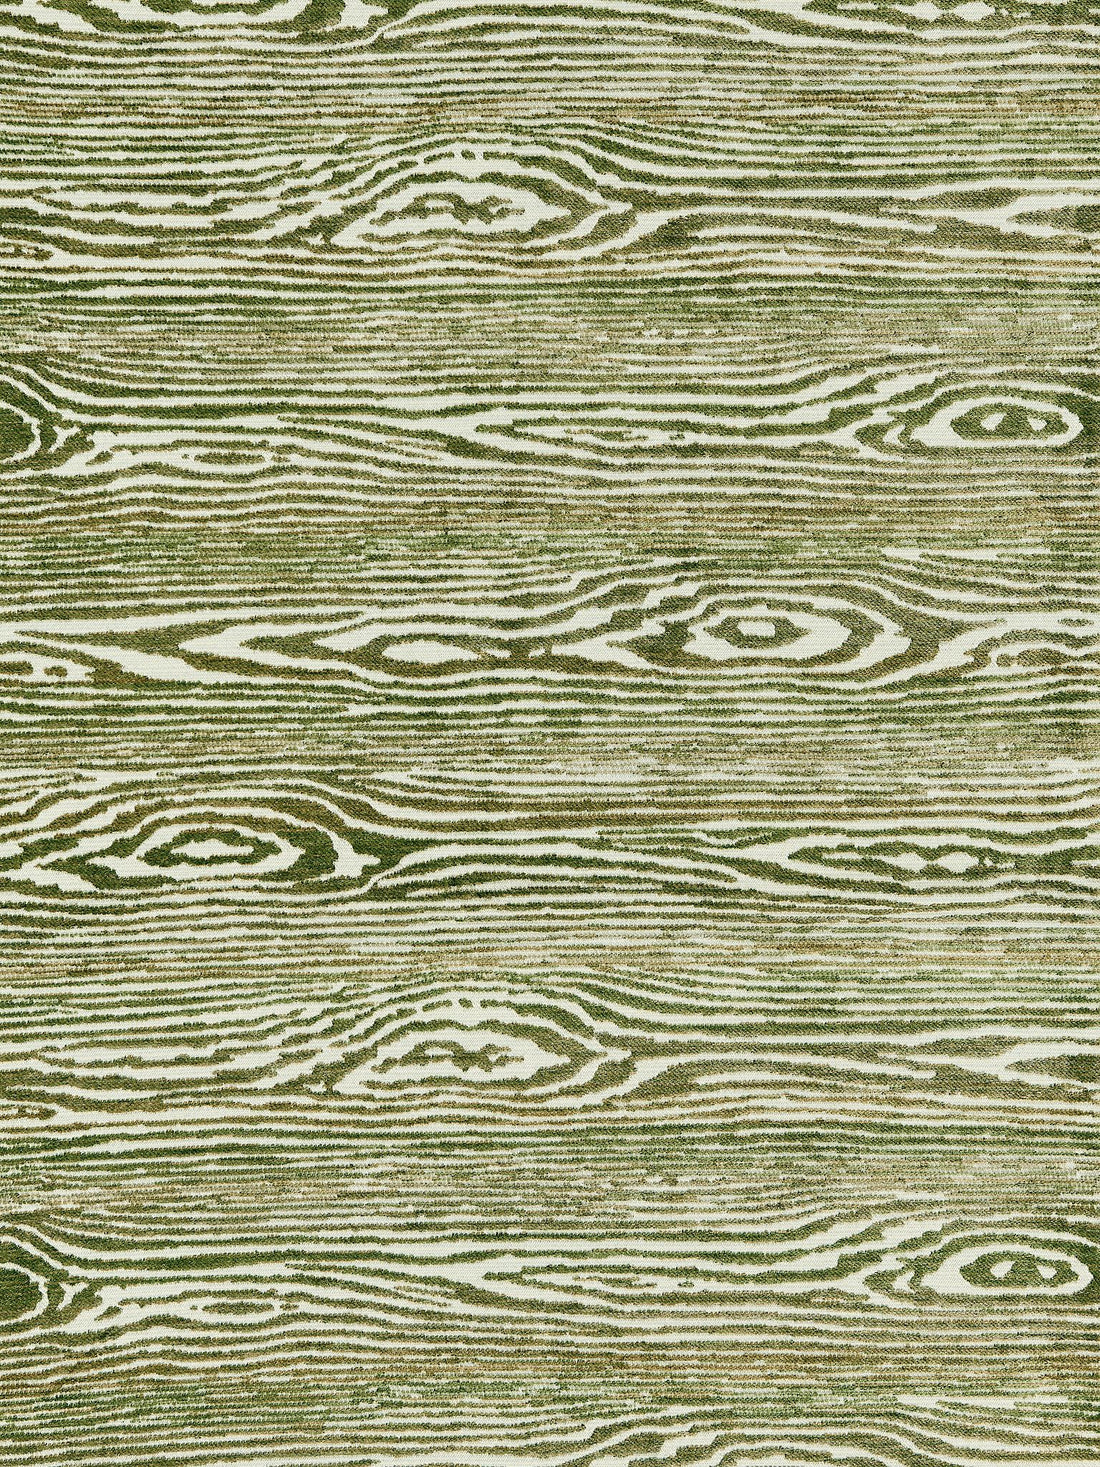 Muir Woods fabric in moss color - pattern number CD 0001OB41 - by Scalamandre in the Old World Weavers collection